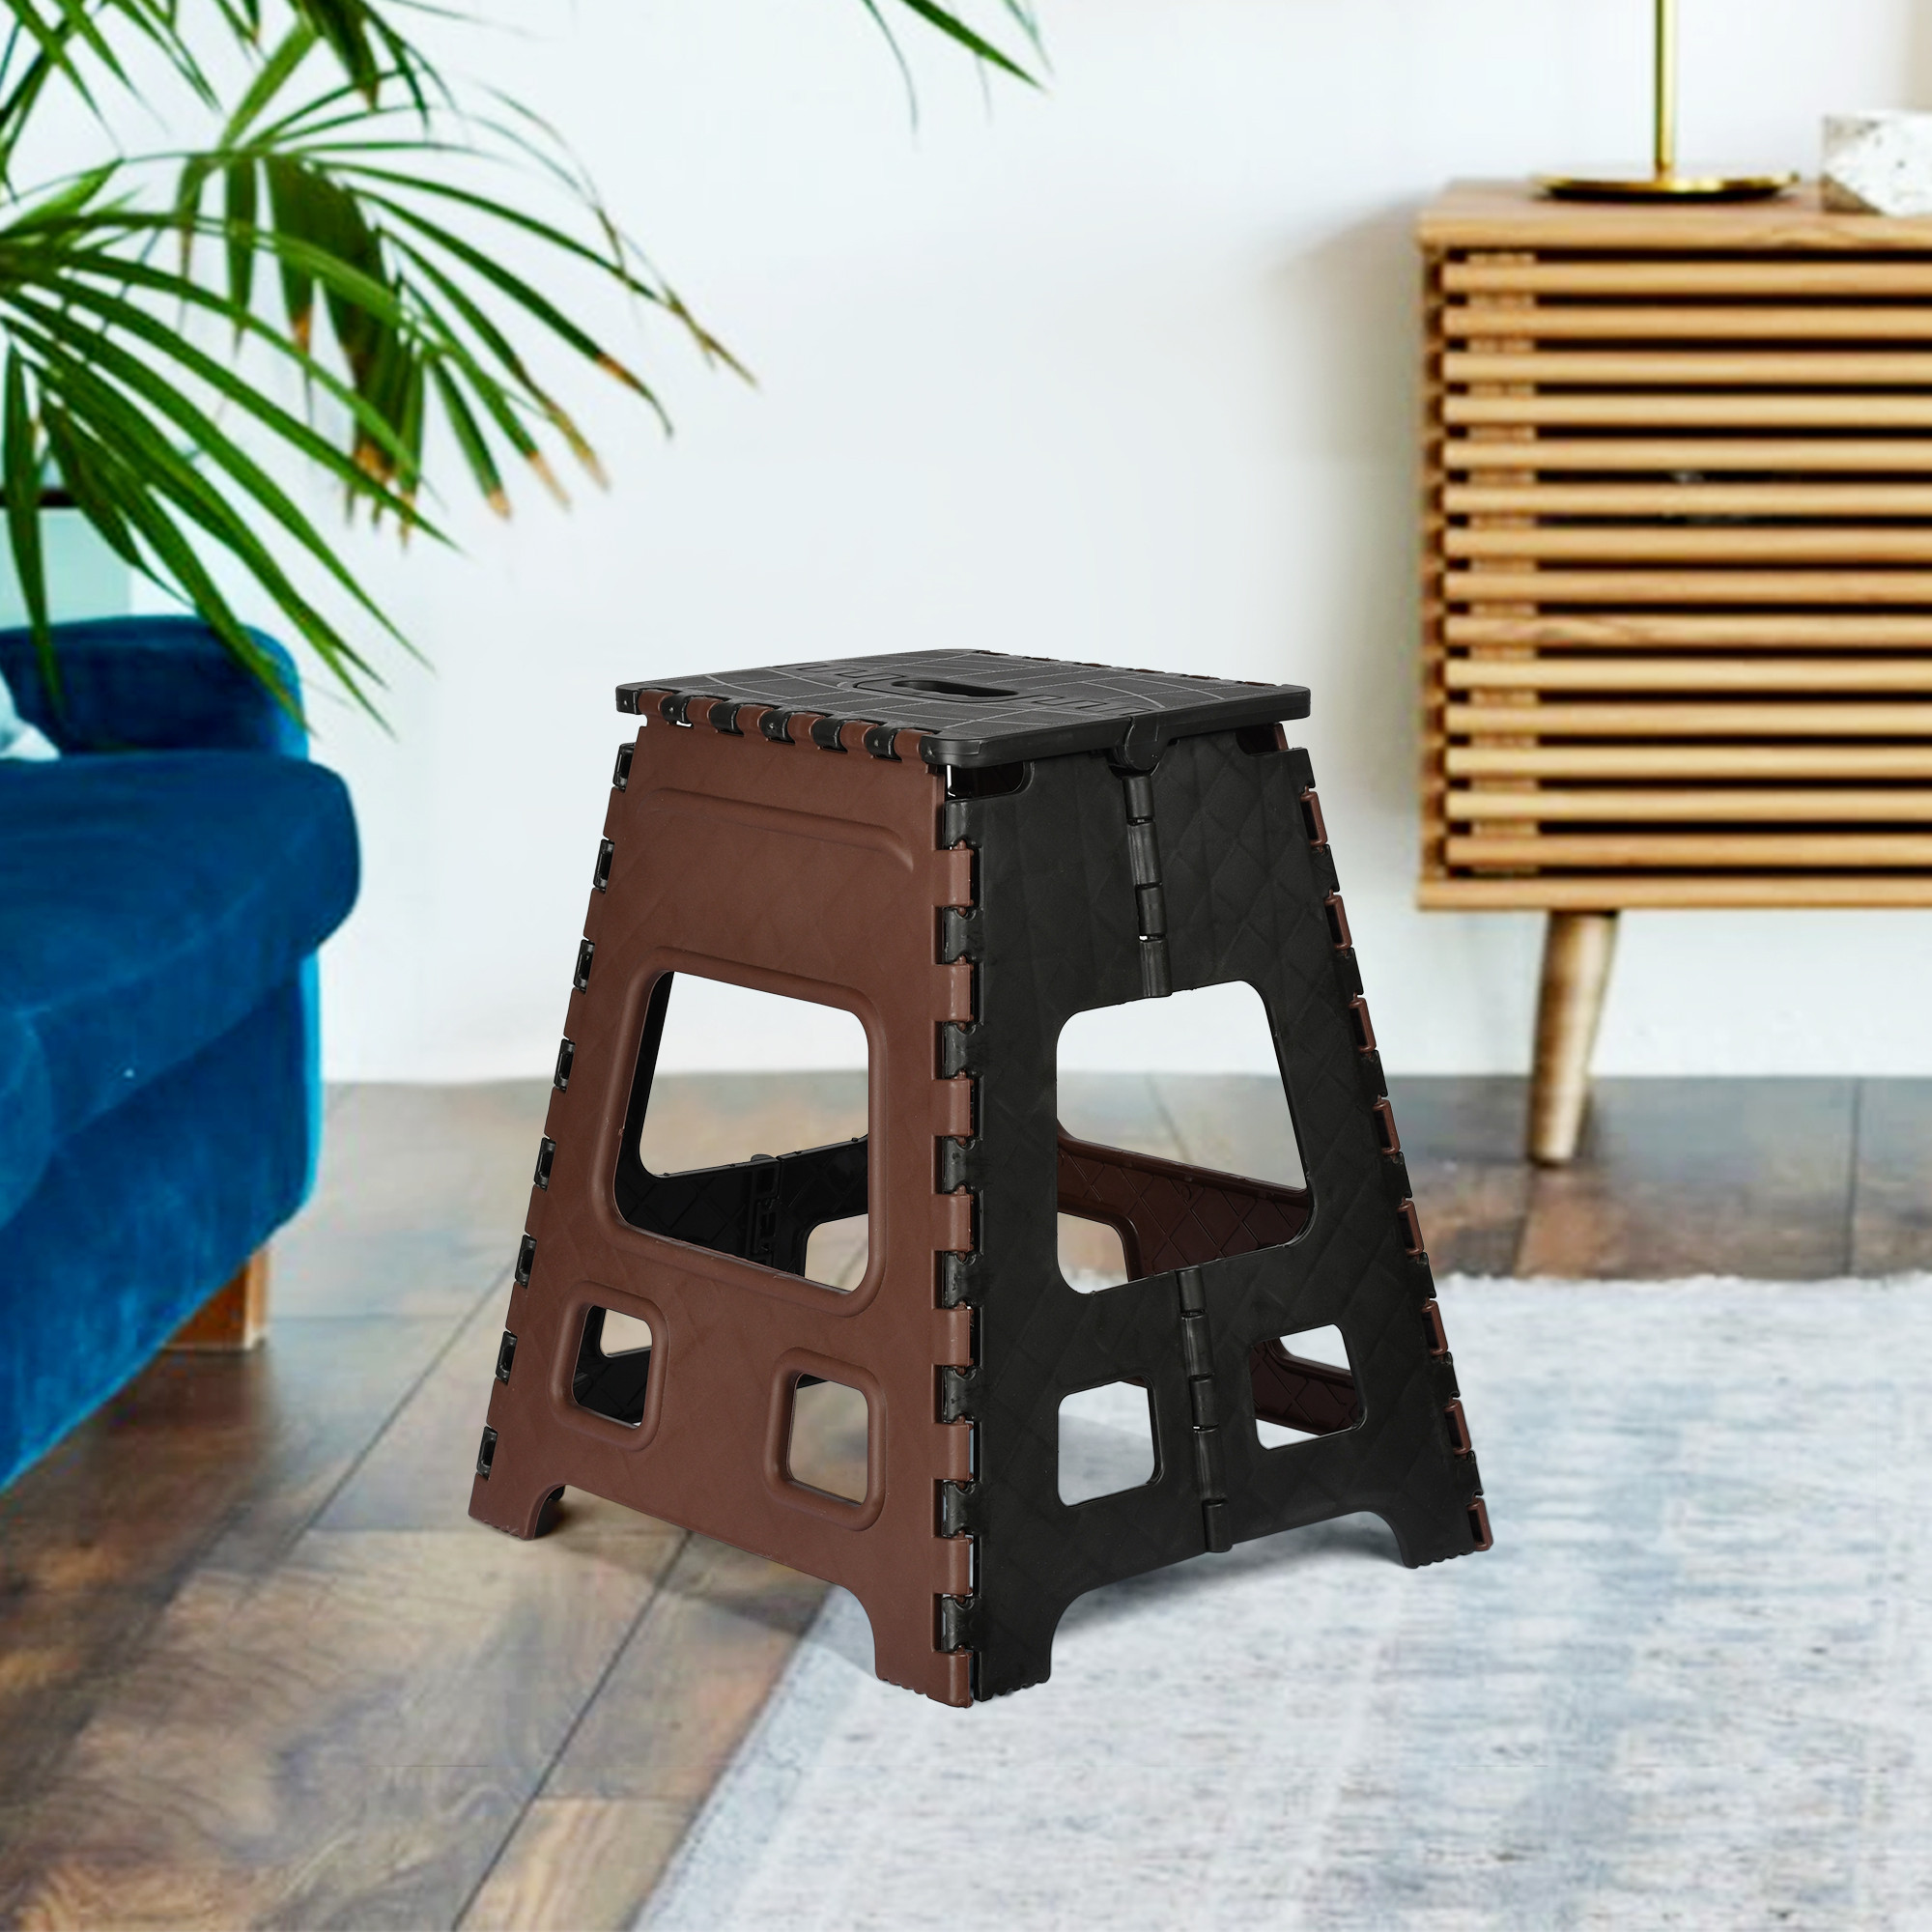 Kuber Industries Stool | Foldable Stool | Collapsible Camping Chair | Stool for Outdoor-Fishing-Hiking-Gardening-Travel | Portable Stool | Multipurpose Sitting Stool | Large | Brown & Black